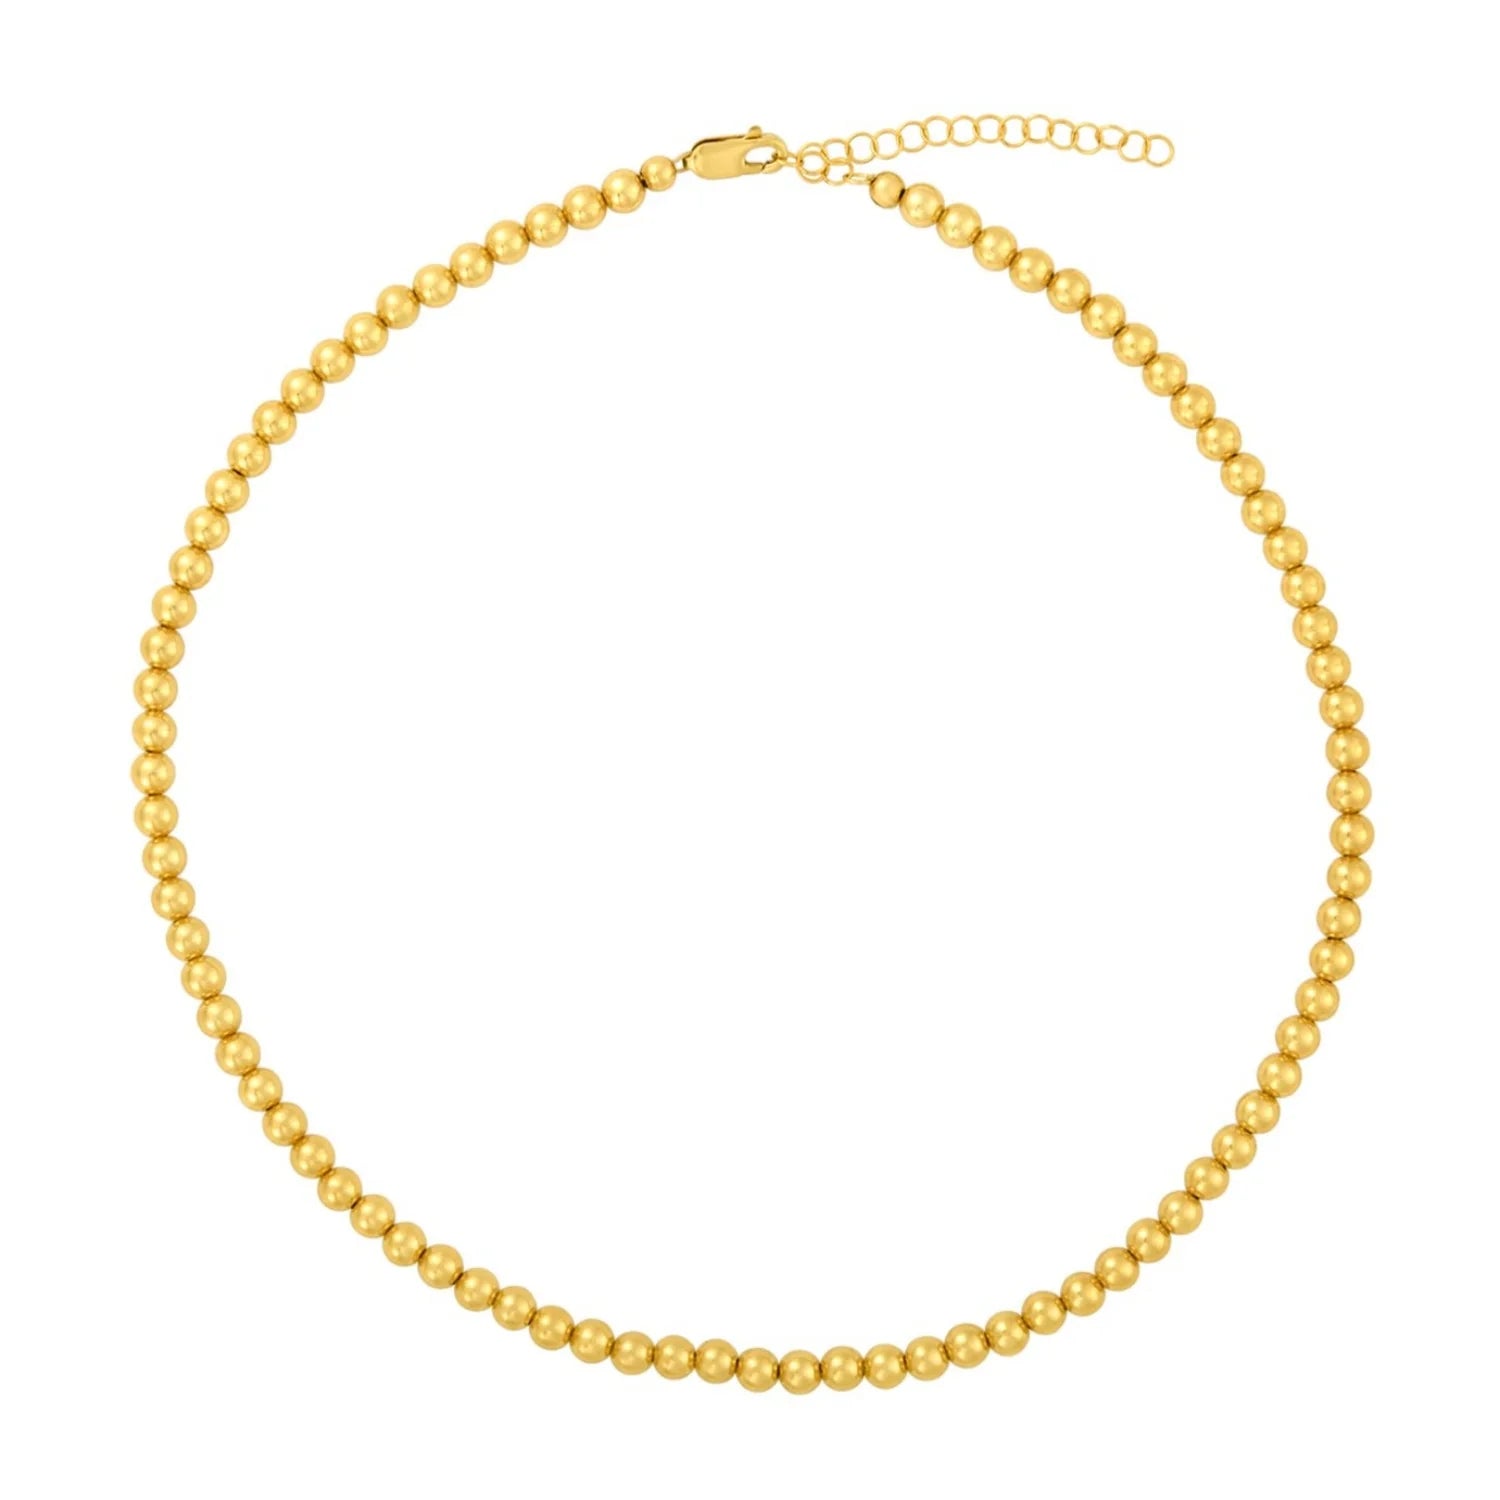 5MM SIGNATURE GOLD BEADED NECKLACE